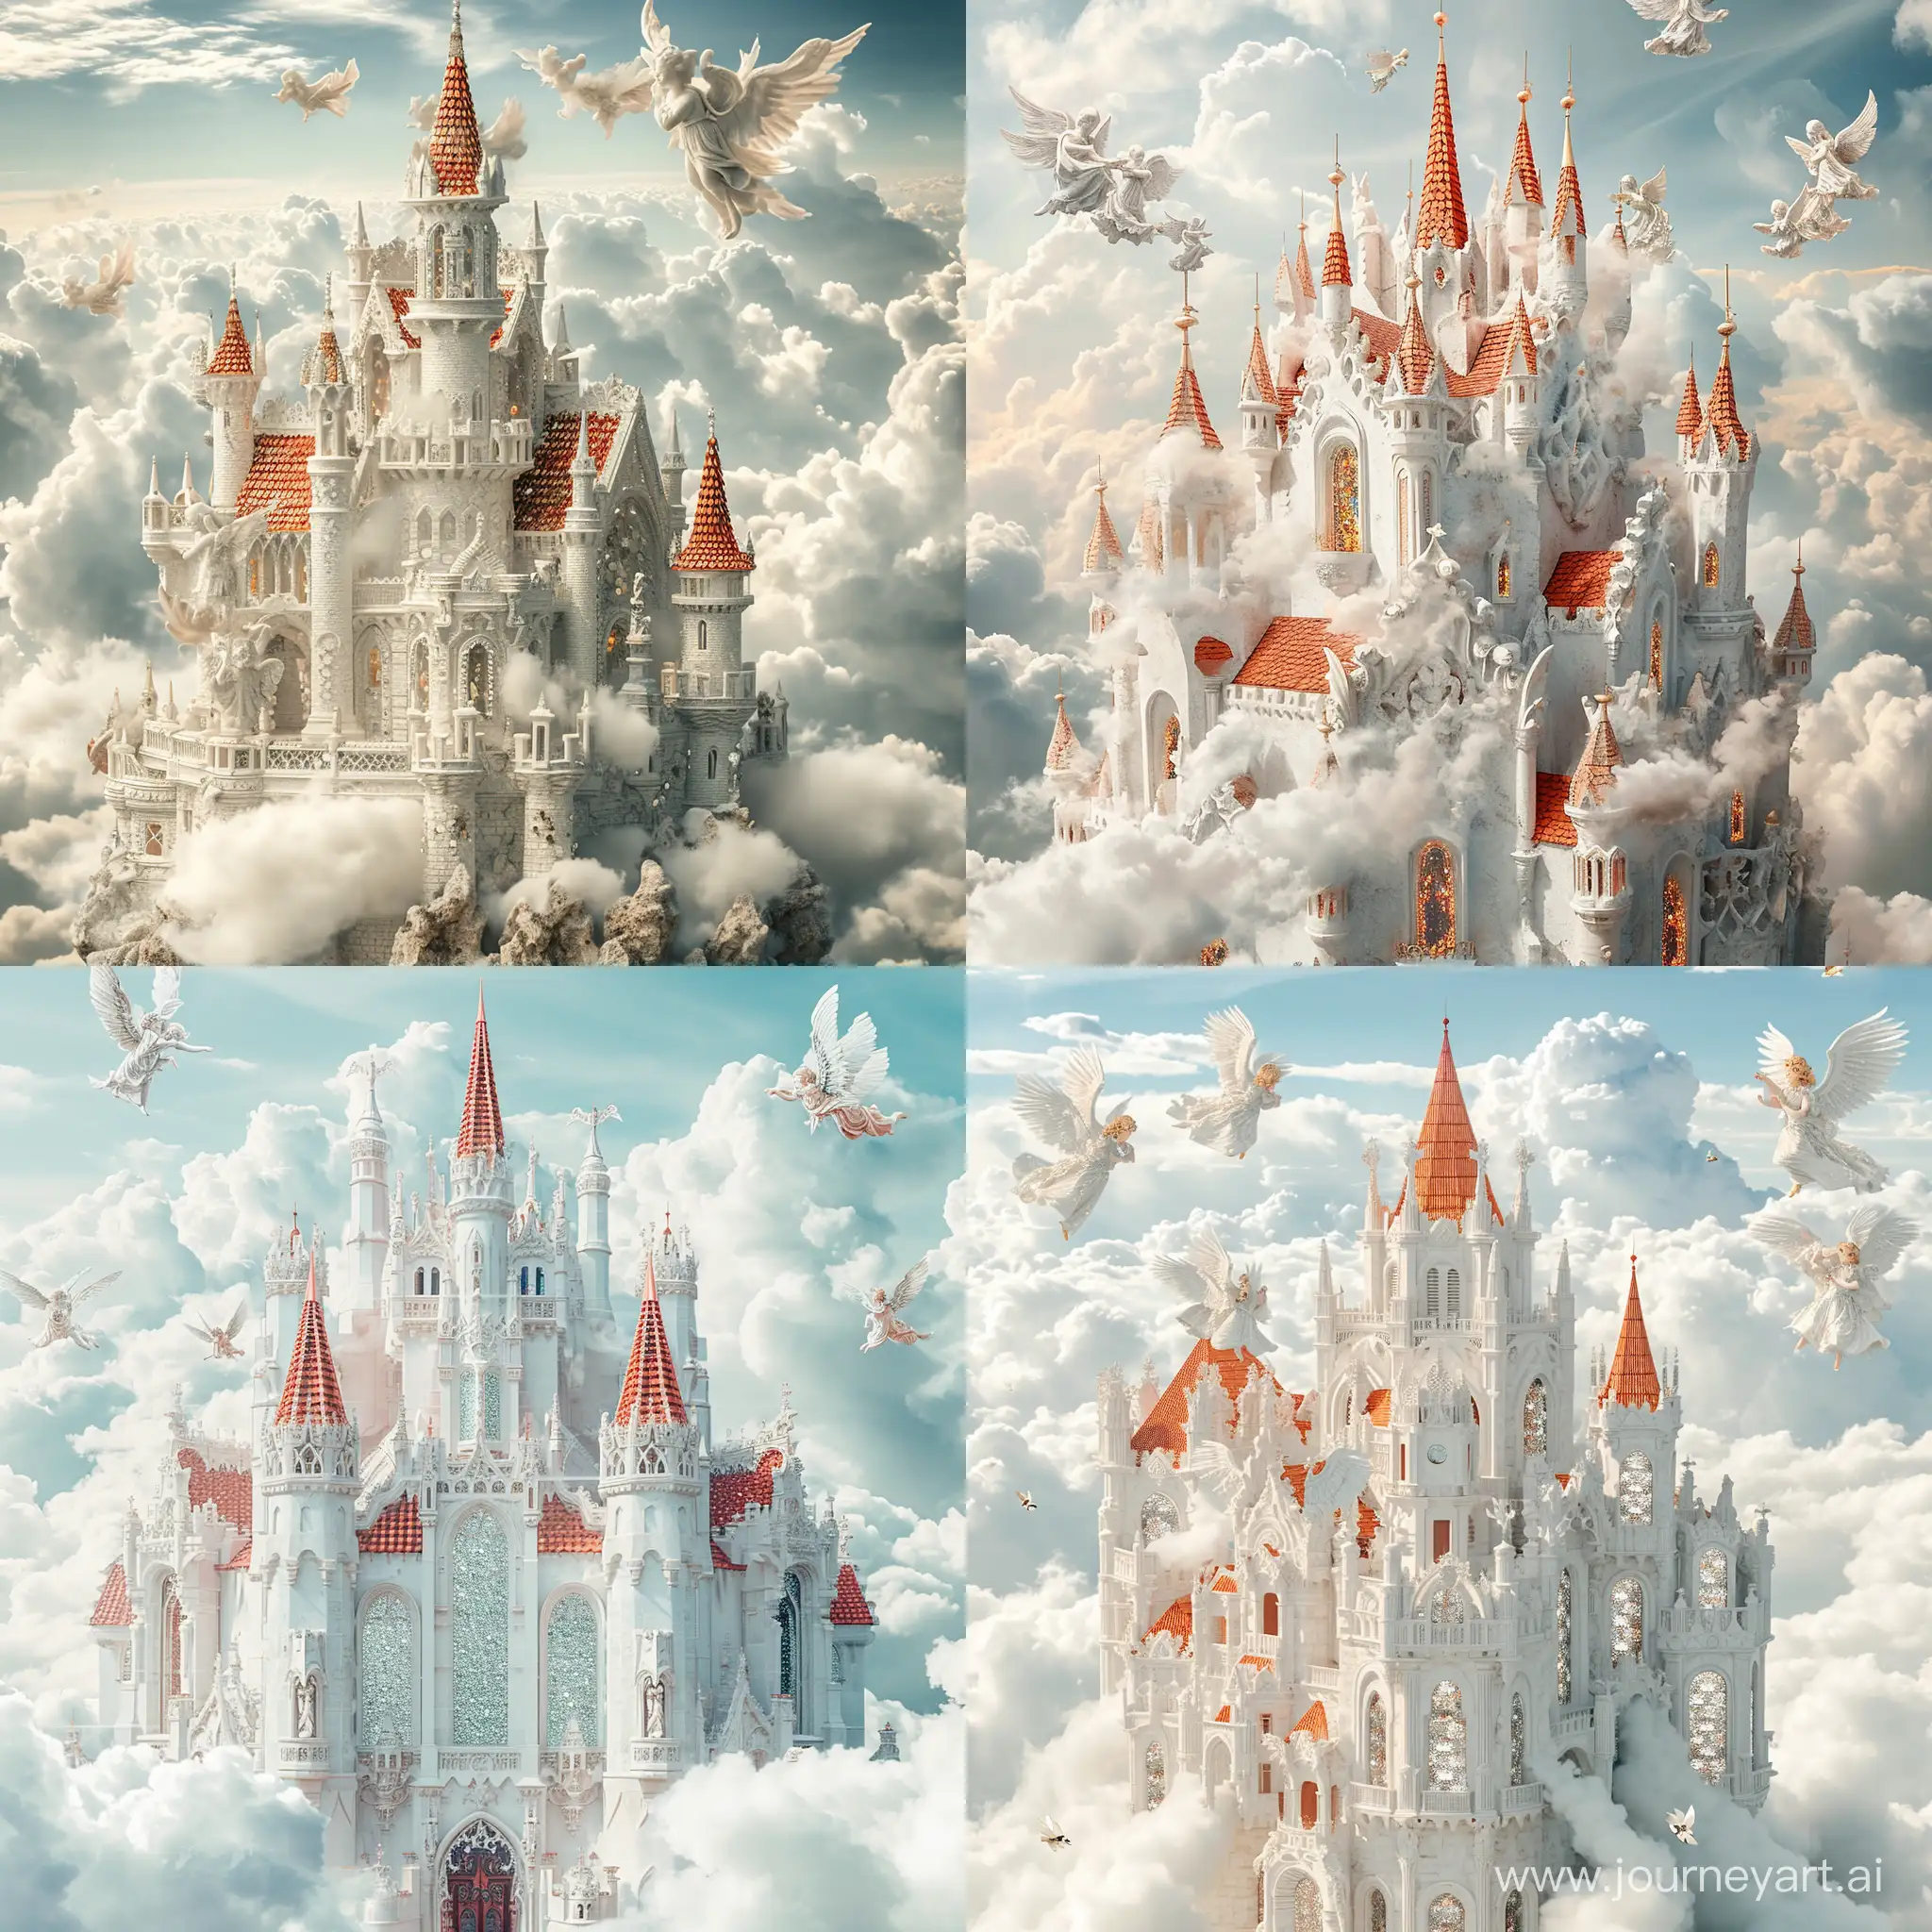 a photo of a very beautiful white castle with clouds all around, close up, a magnificent castle with beautiful windows made of shiny precious stones,red tiles and pointed roof,with beautiful angels flying around the castle,angels beautiful